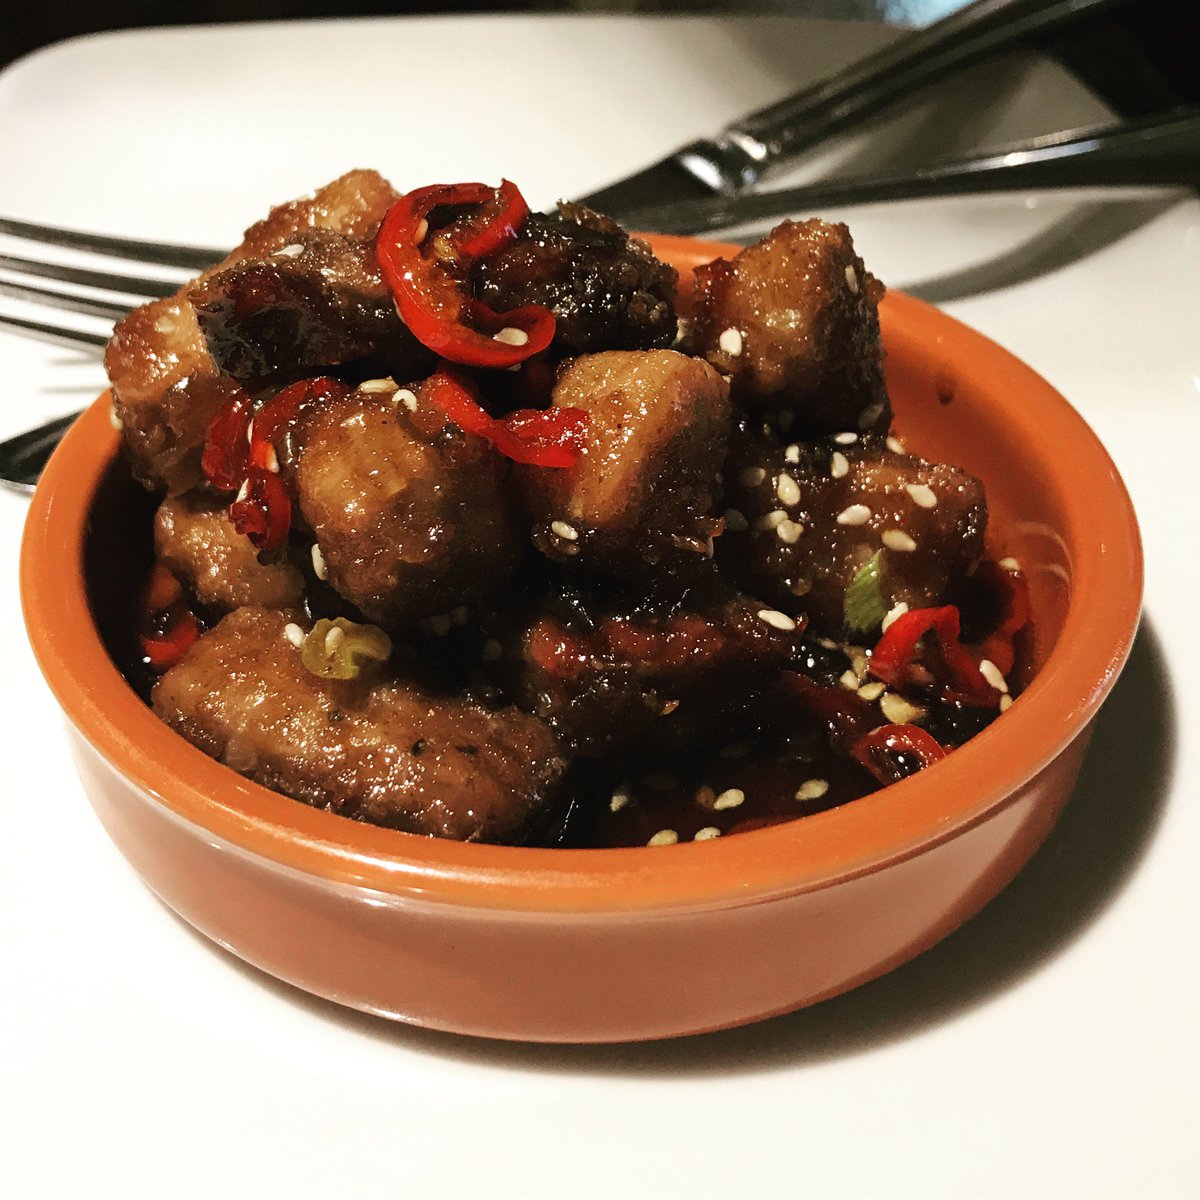 Get out of the rain and into our #WineBar for some bar tapas. Try our new crispy teriyaki beef. #BarTapas #Harrogate